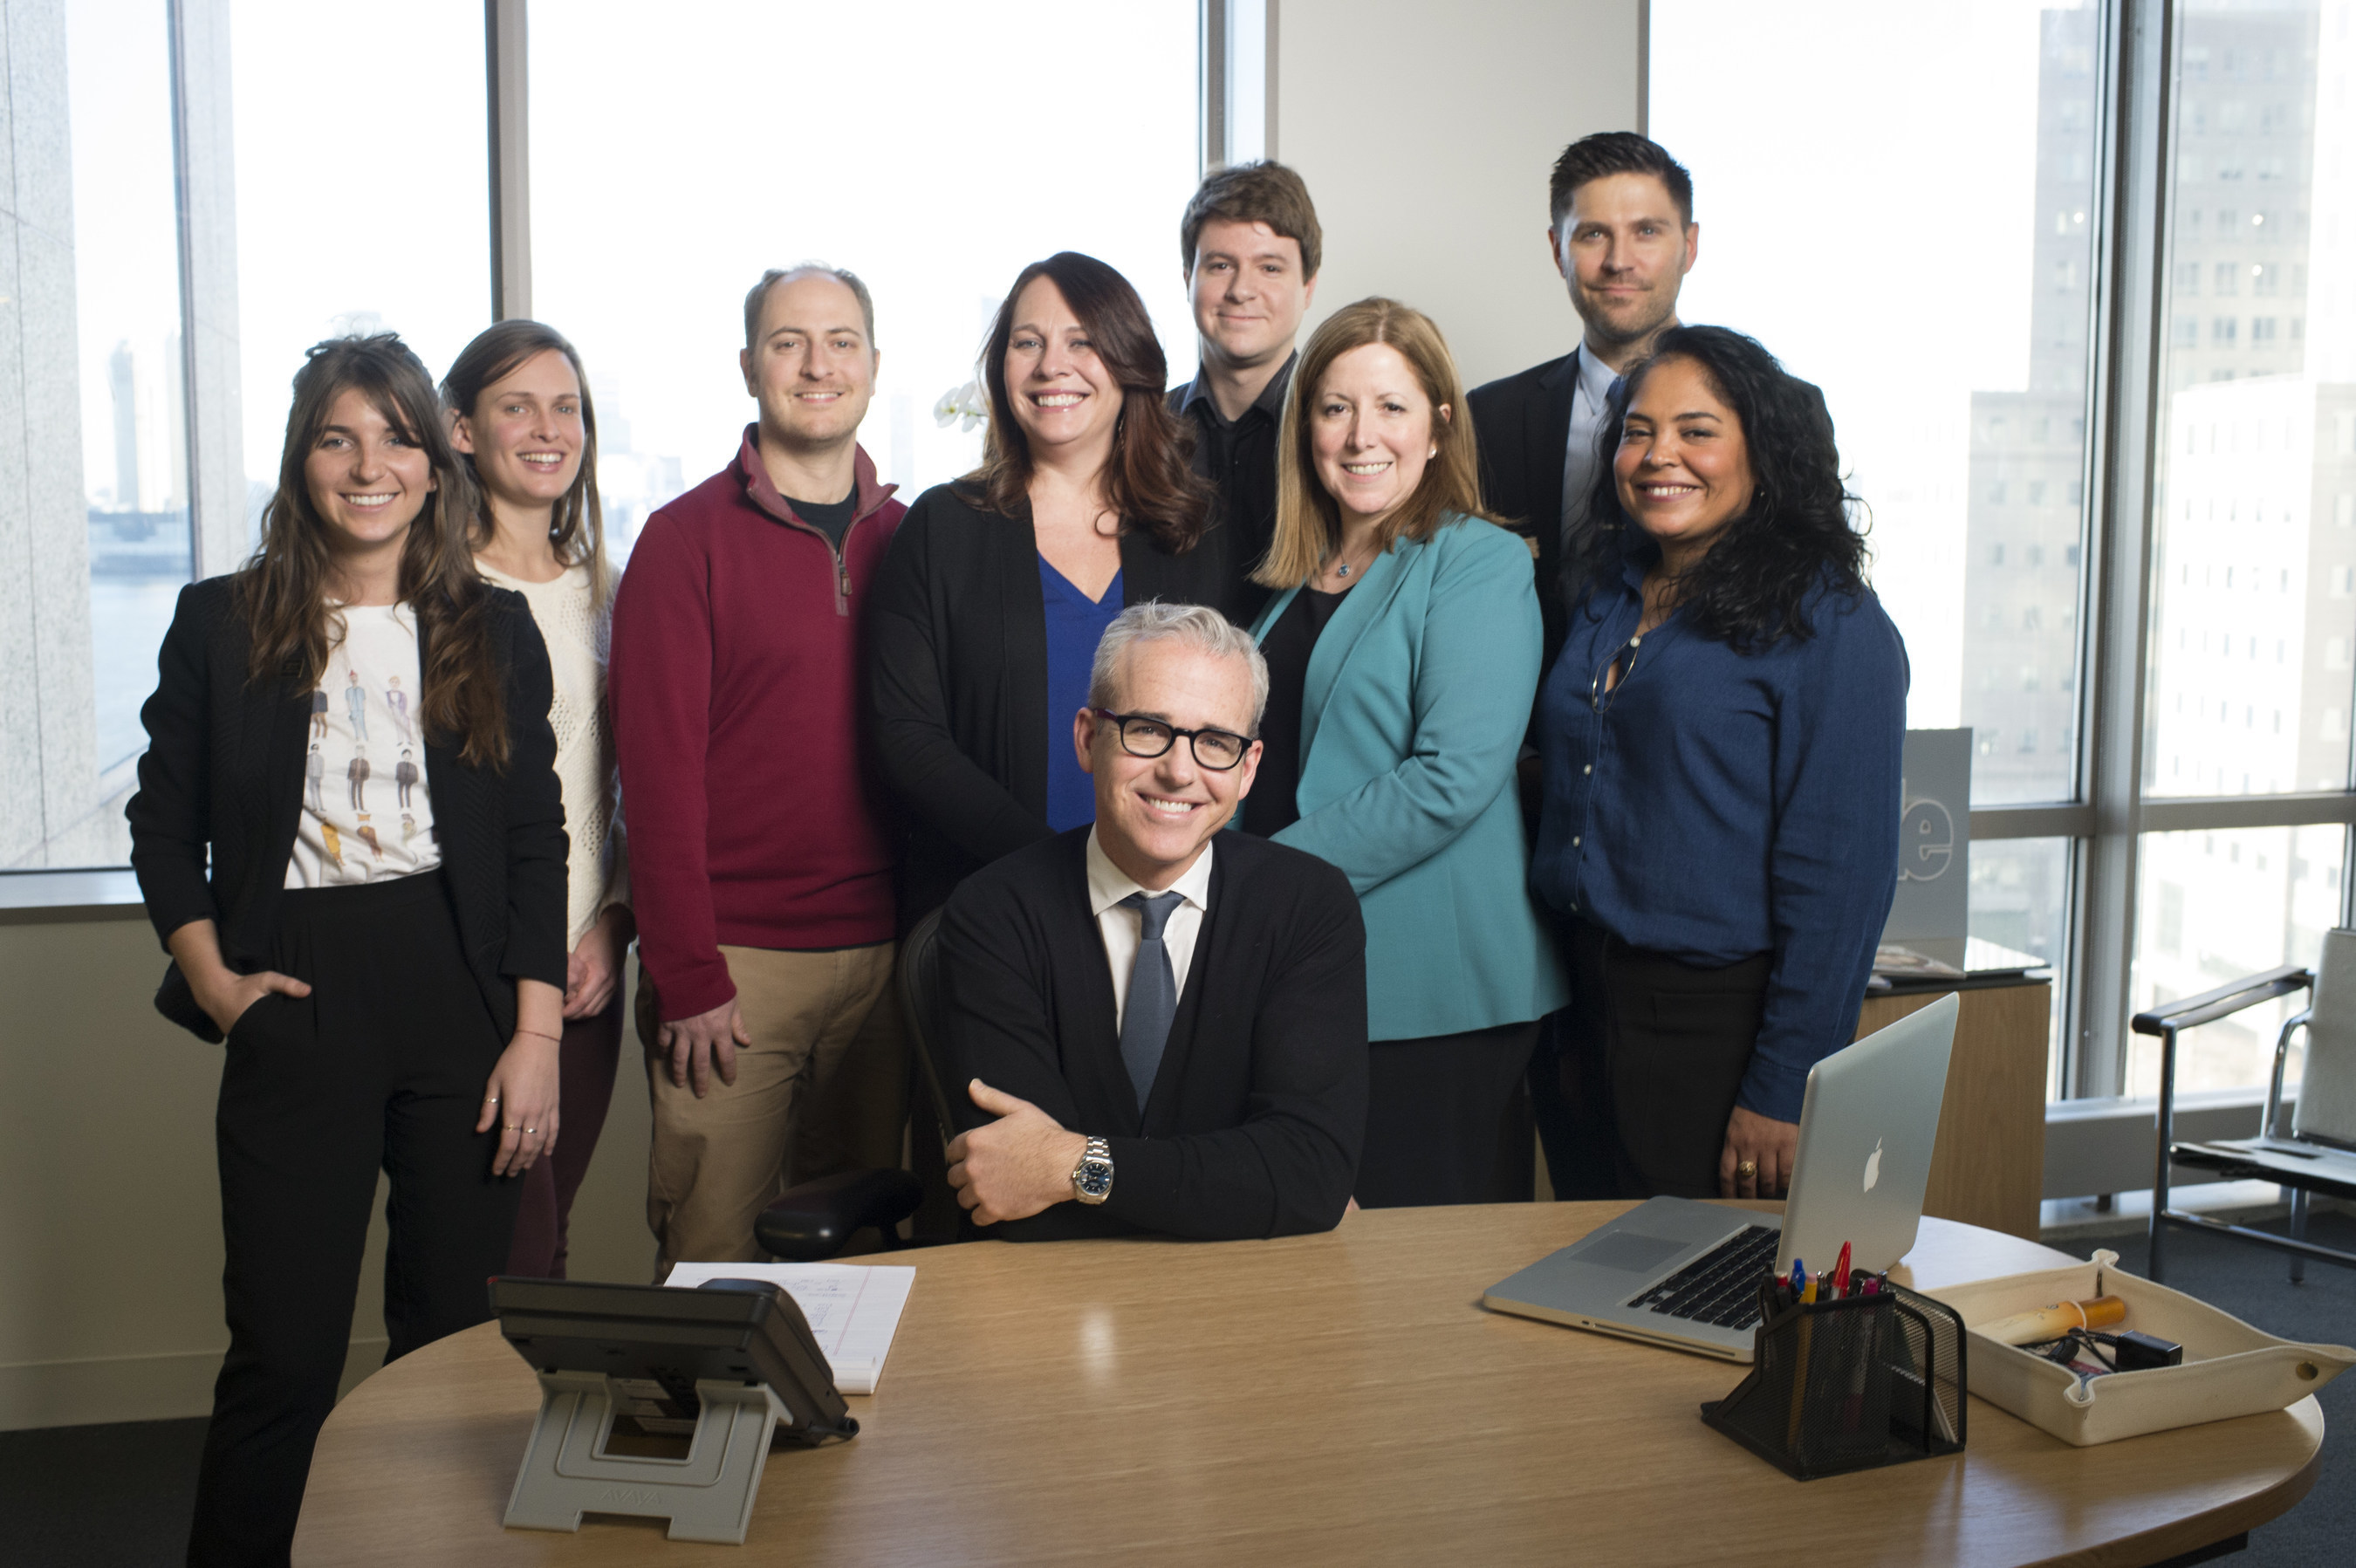 Editorial Director of Time Inc. Jess Cagle and the crime reporters at People, whose investigative reporting is the basis of Investigation Discovery's all-new series "People Magazine Investigates," premiering Monday, November 7 at 9/8c.